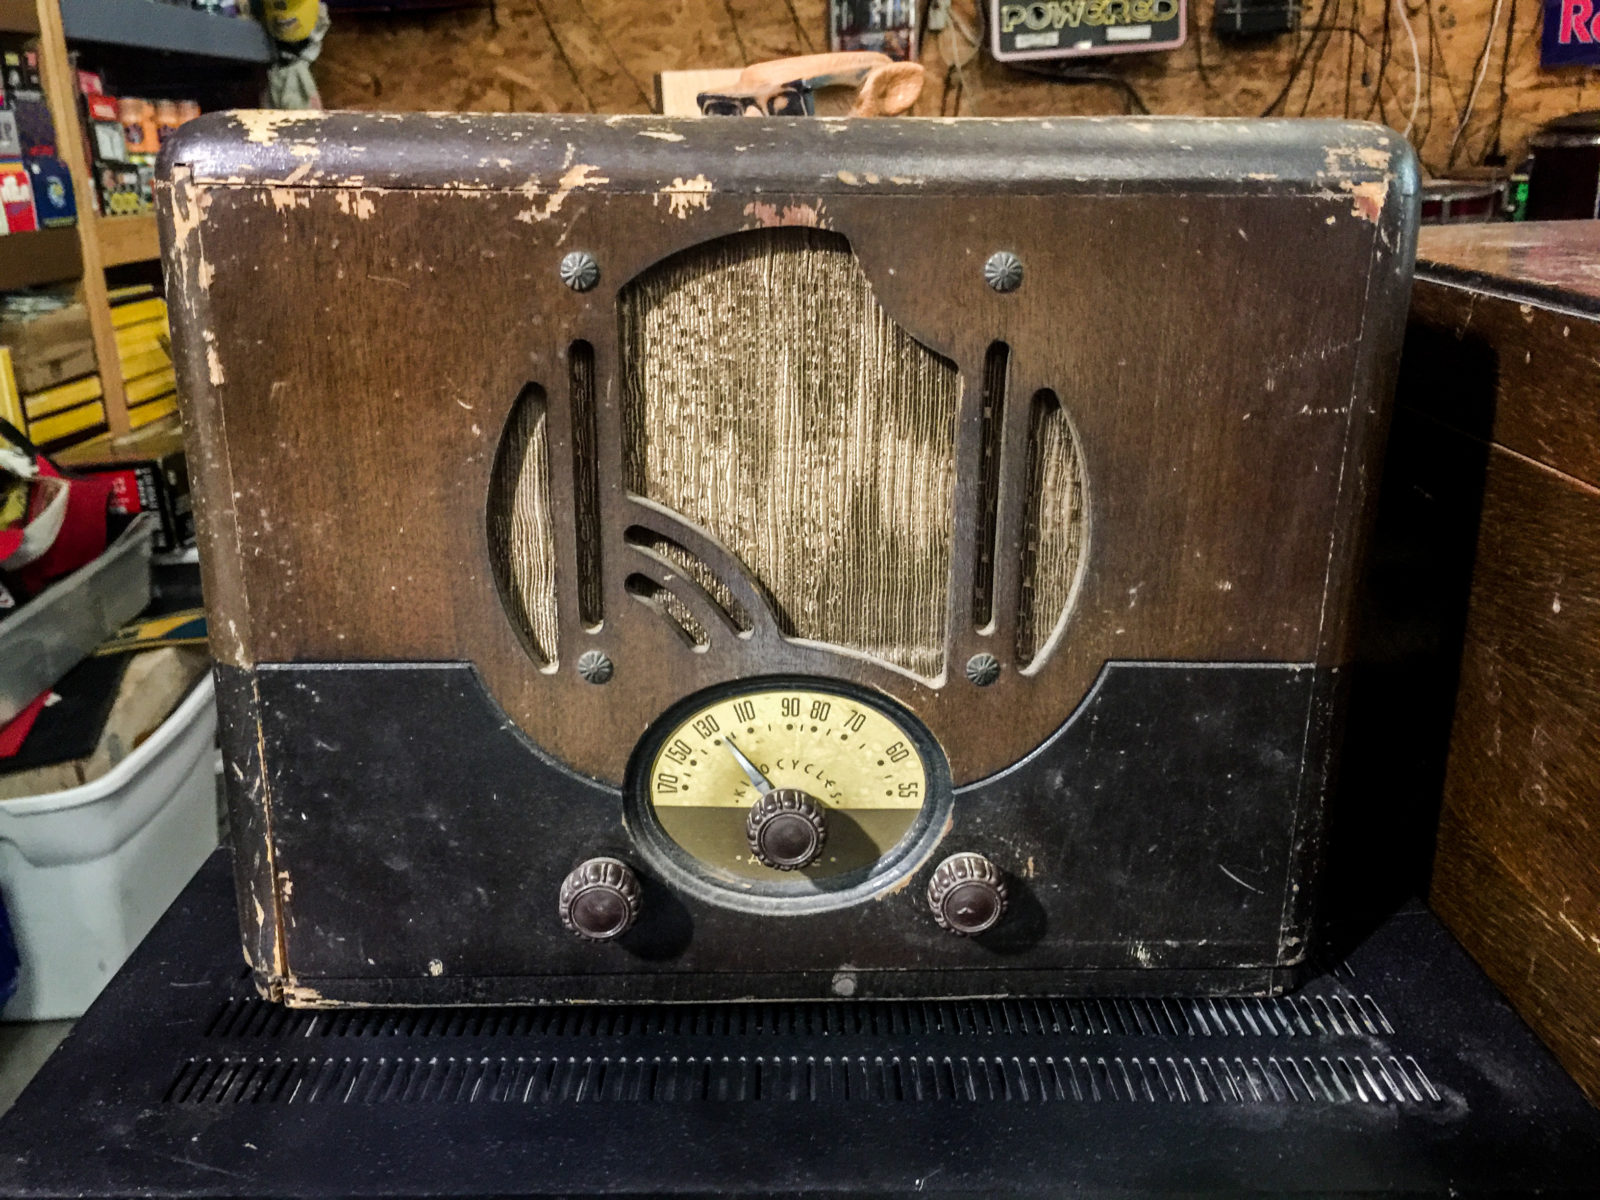 Antique Radio • This is an oldie but a goodie! Not many of these sitting around. It will definitely start a conversation.